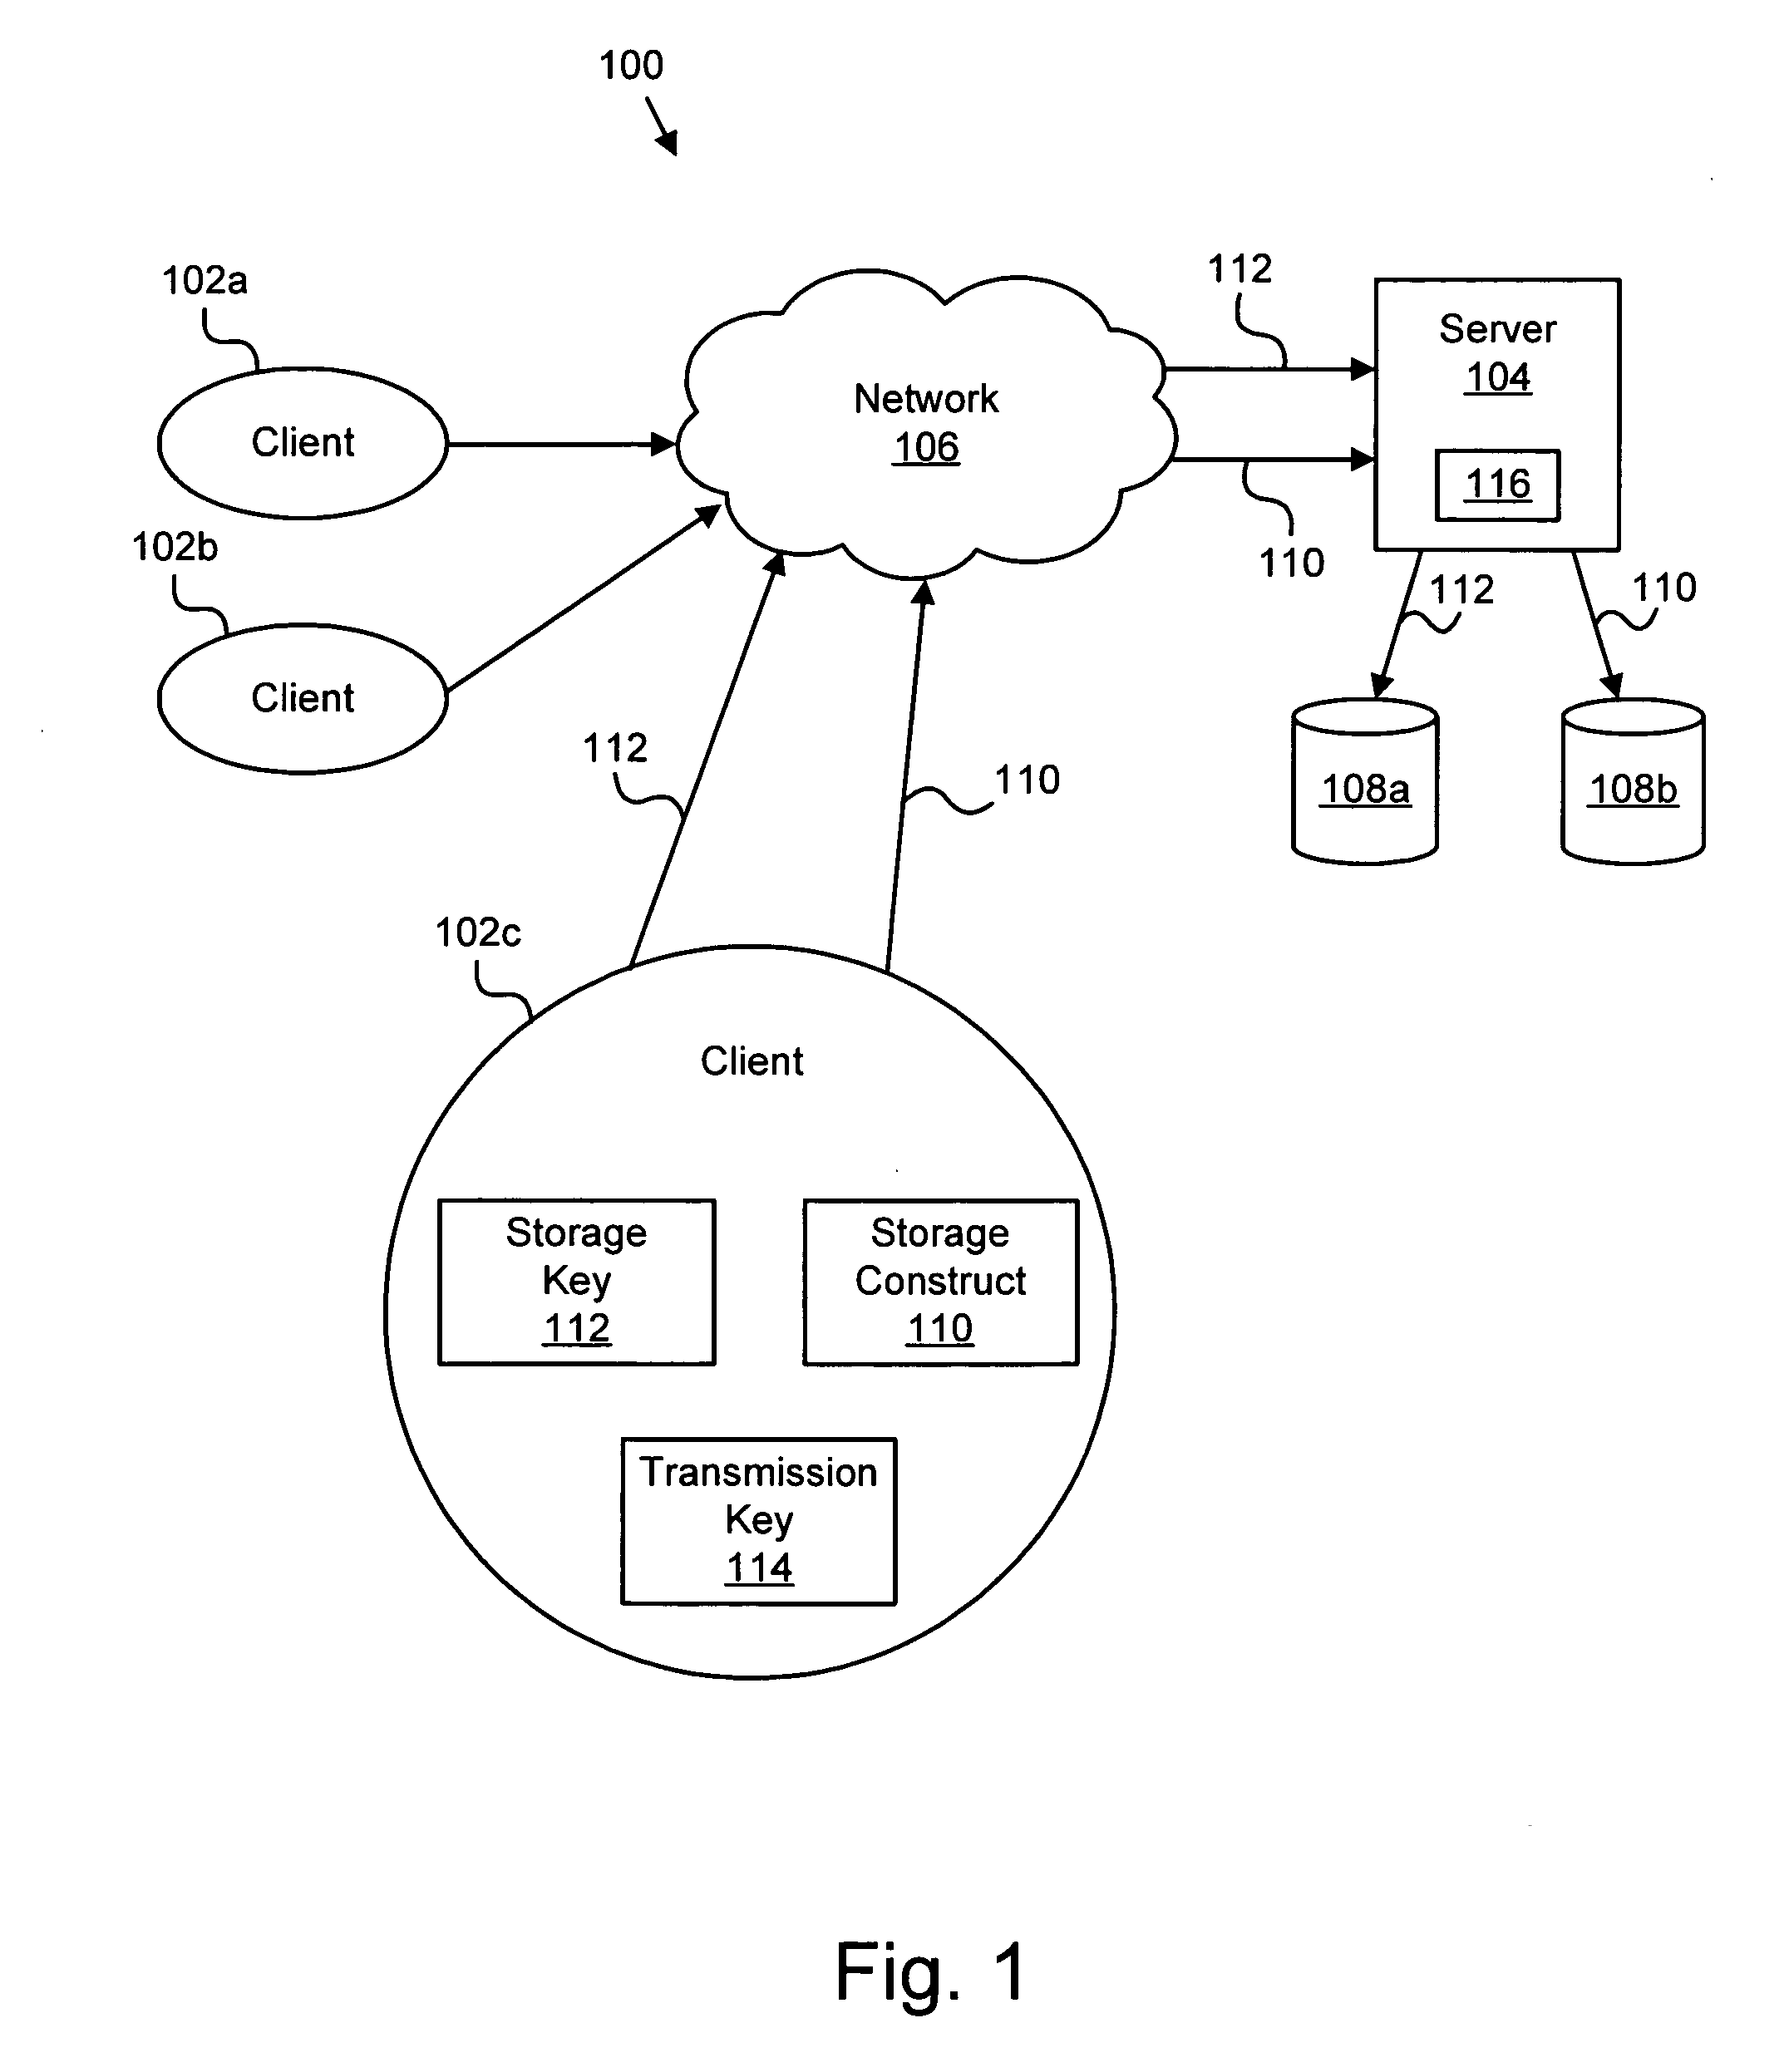 Apparatus, system, and method for transparent end-to-end security of storage data in a client-server environment